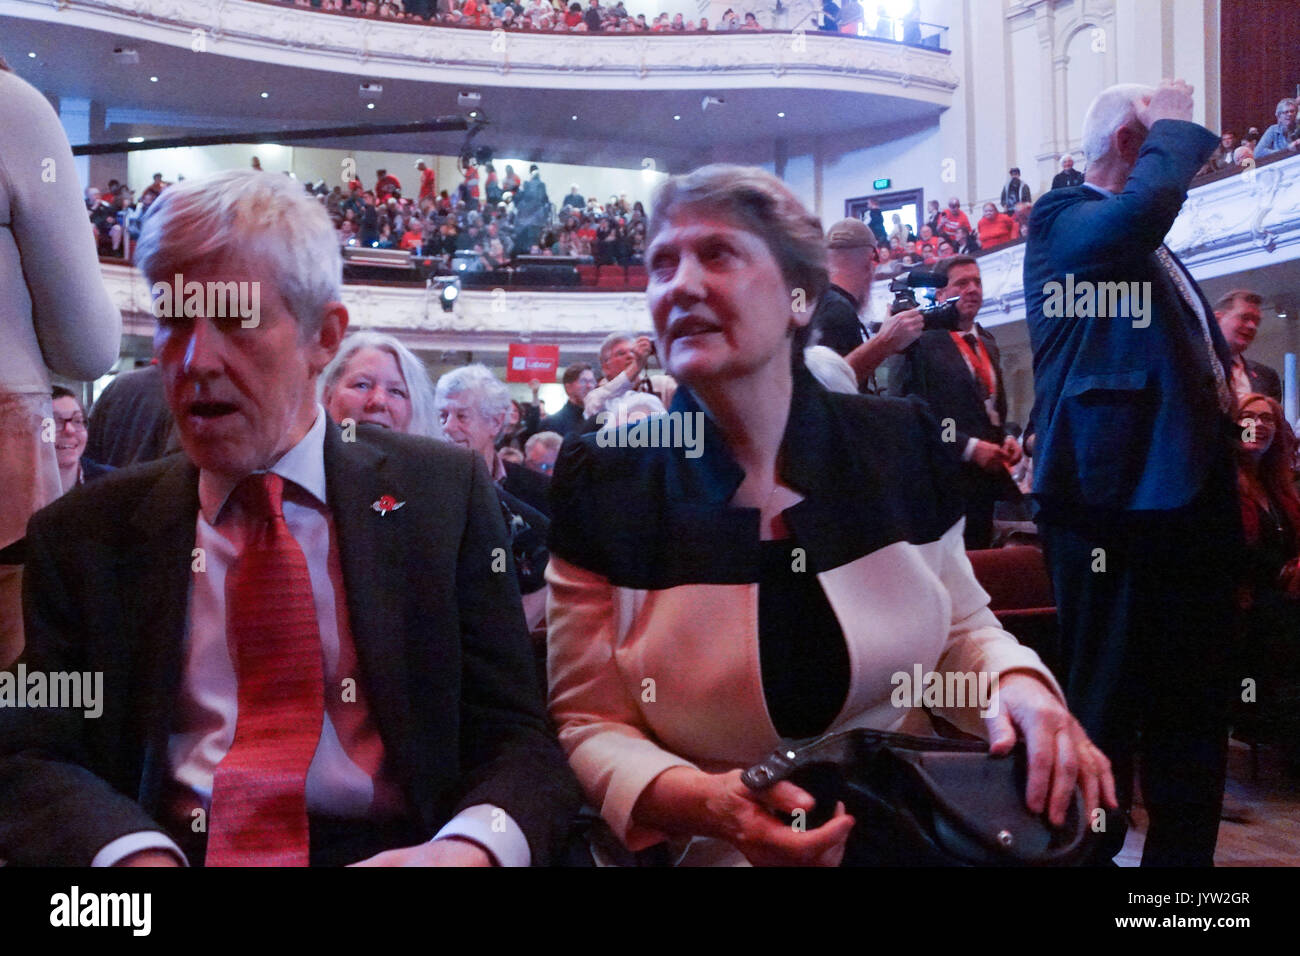 Auckland, New Zealand. 20th Aug, 2017. Former Prime Minister Helen Clark (R) with her husband Peter Davis (L) attend the Labour Party's official campaign launch at Auckland Town Hall, New Zealand on Aug 20, 2017. The 2017 New Zealand general election is scheduled to be held on 23 September 2017 . The current government is National Party. Credit: Shirley Kwok/Pacific Press/Alamy Live News Stock Photo